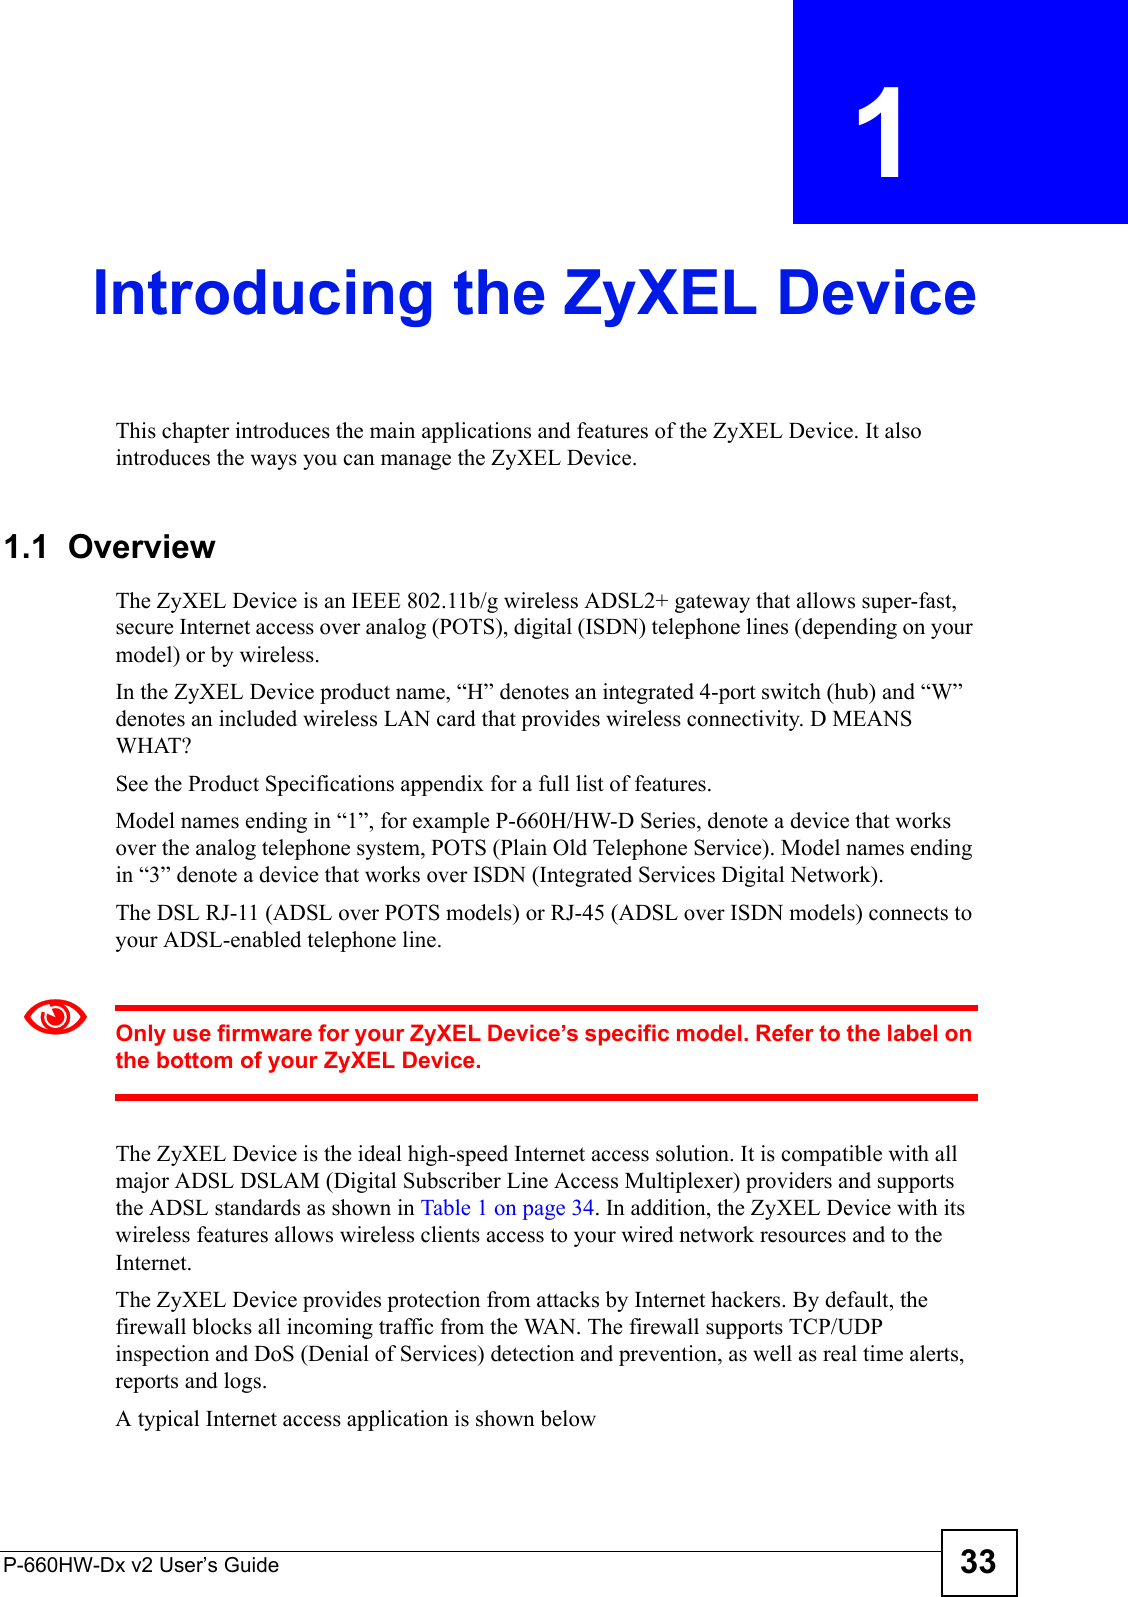 P-660HW-Dx v2 User’s Guide 33CHAPTER  1 Introducing the ZyXEL DeviceThis chapter introduces the main applications and features of the ZyXEL Device. It also introduces the ways you can manage the ZyXEL Device.1.1  OverviewThe ZyXEL Device is an IEEE 802.11b/g wireless ADSL2+ gateway that allows super-fast, secure Internet access over analog (POTS), digital (ISDN) telephone lines (depending on your model) or by wireless.In the ZyXEL Device product name, “H” denotes an integrated 4-port switch (hub) and “W” denotes an included wireless LAN card that provides wireless connectivity. D MEANS WHAT?See the Product Specifications appendix for a full list of features.Model names ending in “1”, for example P-660H/HW-D Series, denote a device that works over the analog telephone system, POTS (Plain Old Telephone Service). Model names ending in “3” denote a device that works over ISDN (Integrated Services Digital Network).The DSL RJ-11 (ADSL over POTS models) or RJ-45 (ADSL over ISDN models) connects to your ADSL-enabled telephone line. 1Only use firmware for your ZyXEL Device’s specific model. Refer to the label on the bottom of your ZyXEL Device.The ZyXEL Device is the ideal high-speed Internet access solution. It is compatible with all major ADSL DSLAM (Digital Subscriber Line Access Multiplexer) providers and supports the ADSL standards as shown in Table 1 on page 34. In addition, the ZyXEL Device with its wireless features allows wireless clients access to your wired network resources and to the Internet.The ZyXEL Device provides protection from attacks by Internet hackers. By default, the firewall blocks all incoming traffic from the WAN. The firewall supports TCP/UDP inspection and DoS (Denial of Services) detection and prevention, as well as real time alerts, reports and logs.A typical Internet access application is shown below